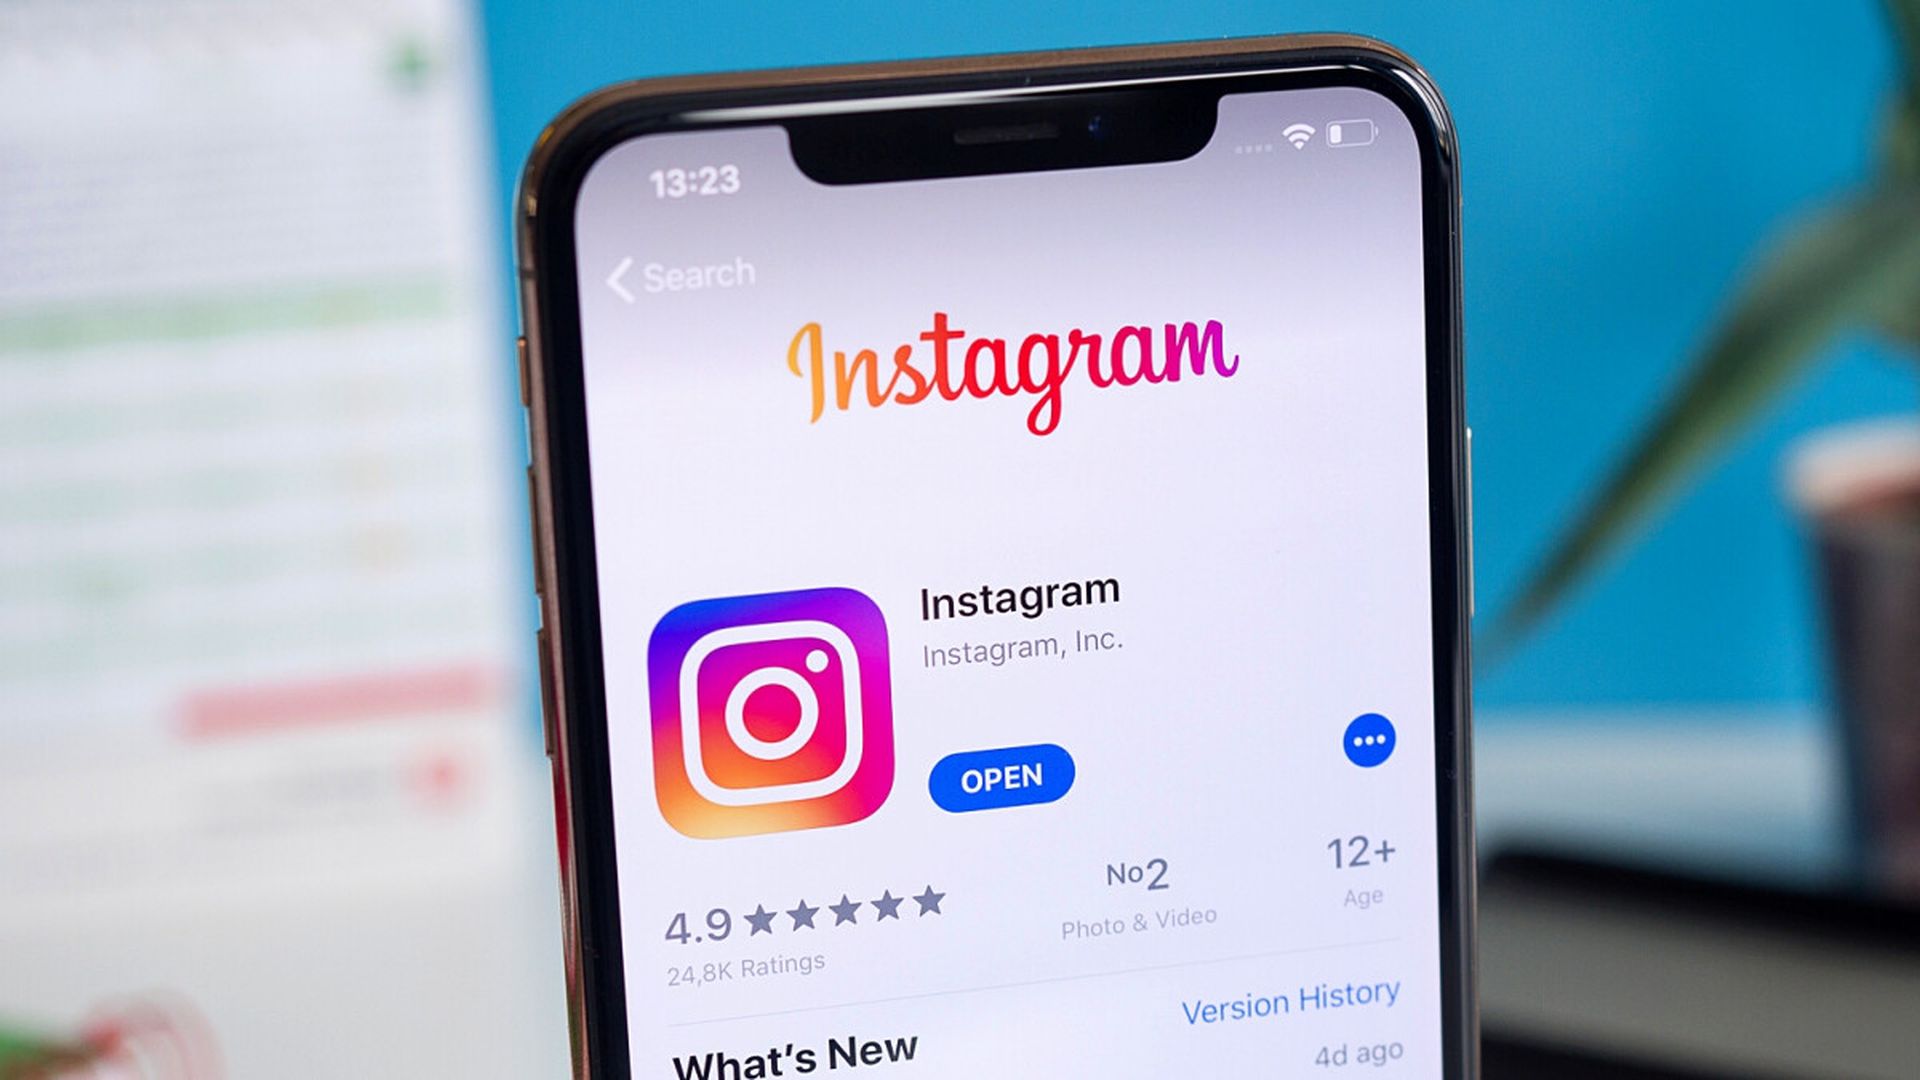 Can't send messages on Instagram: How to fix it?